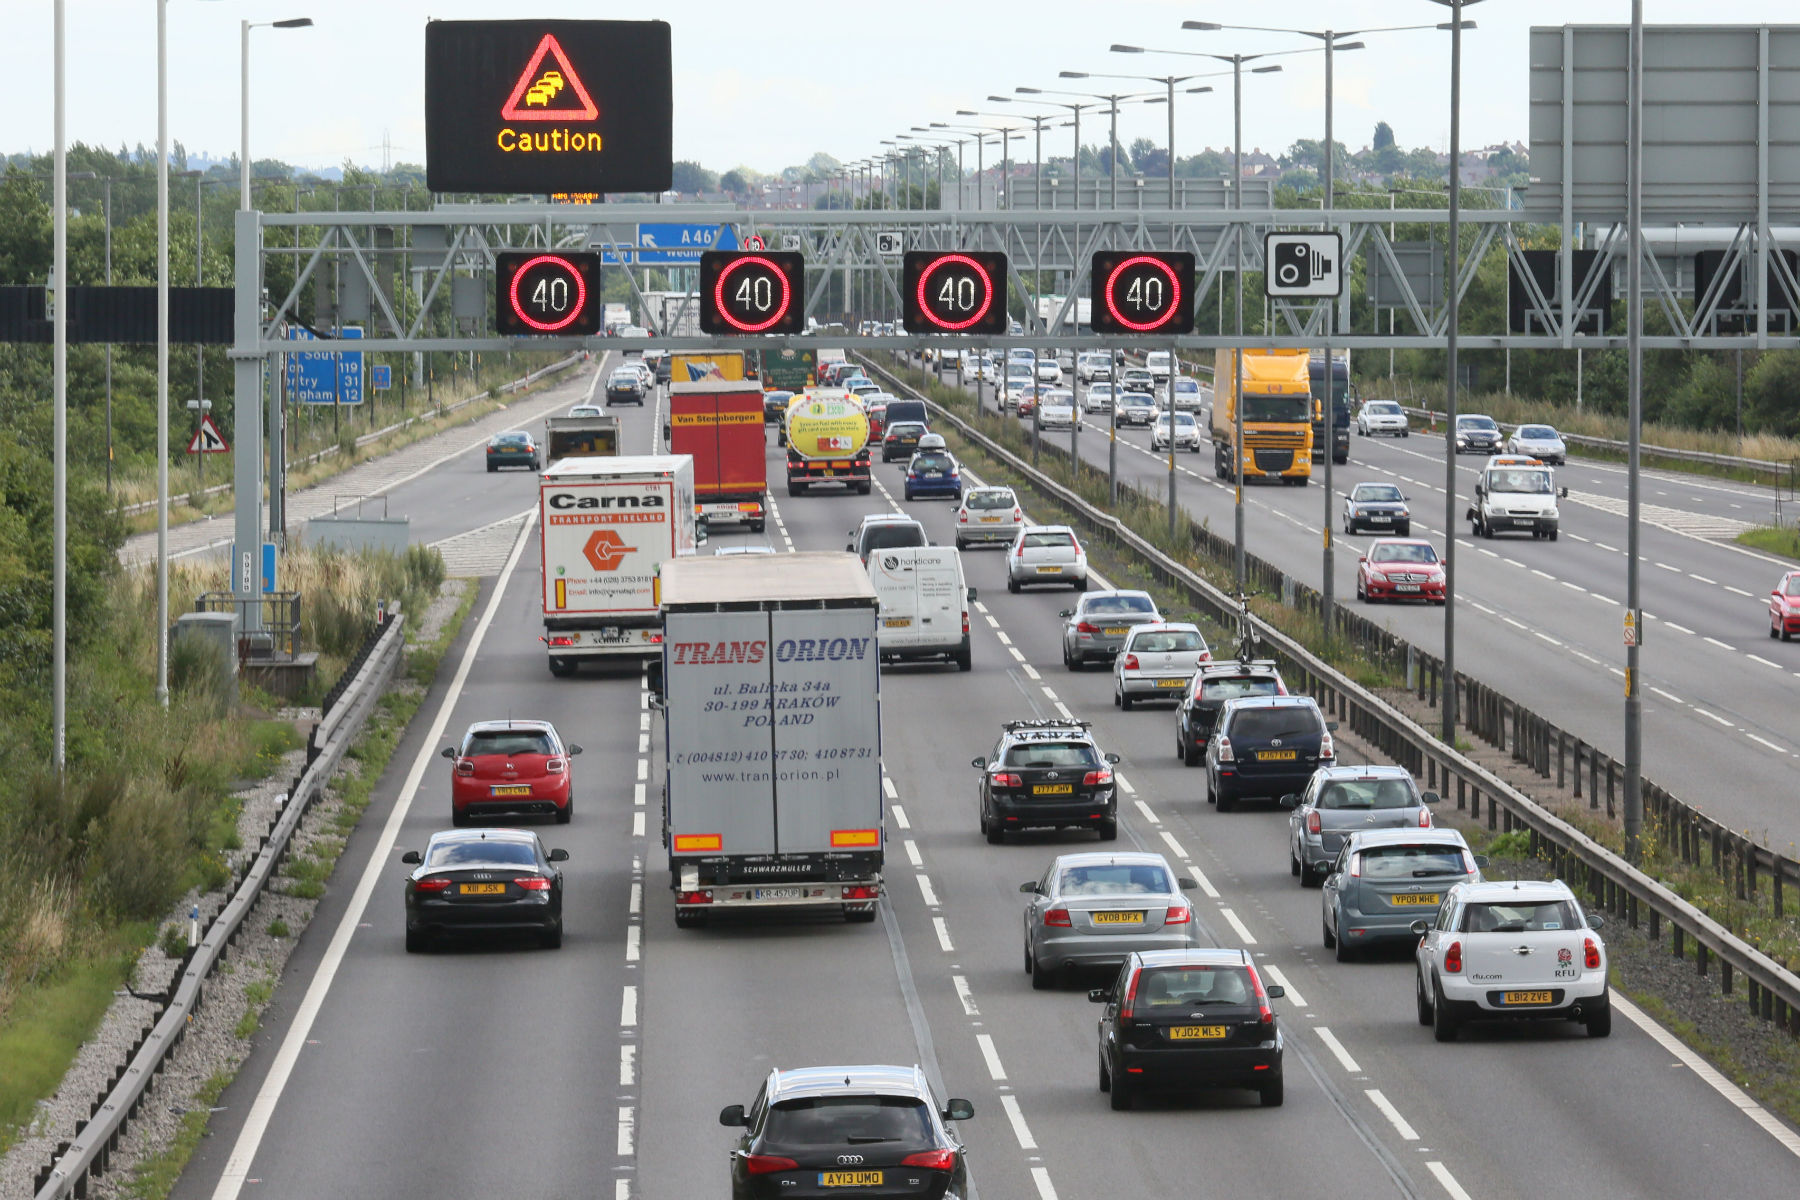 Do you know how to use emergency refuge areas on smart motorways?